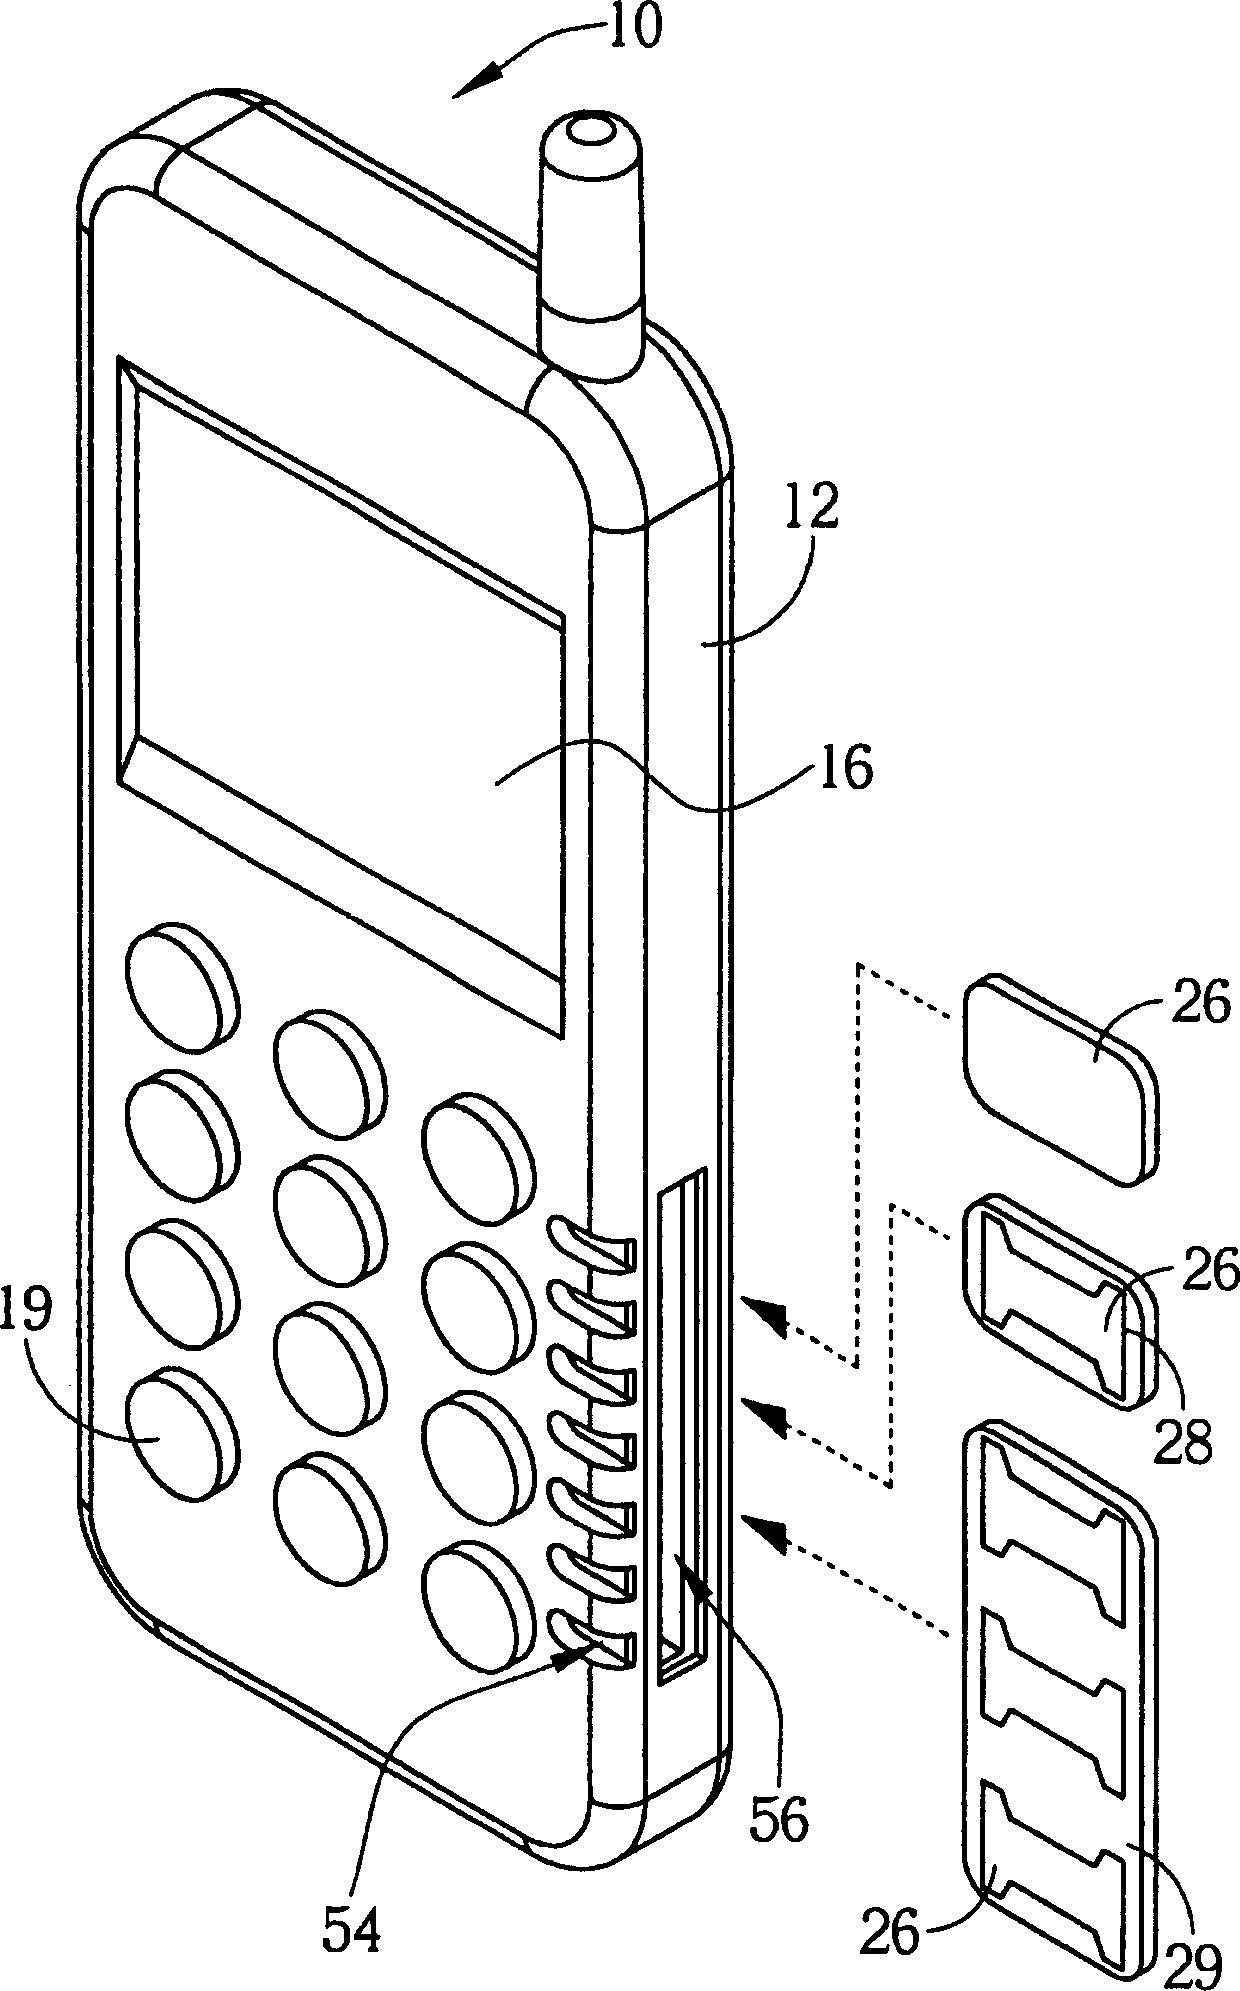 Information device with interactive smell man-machine interface